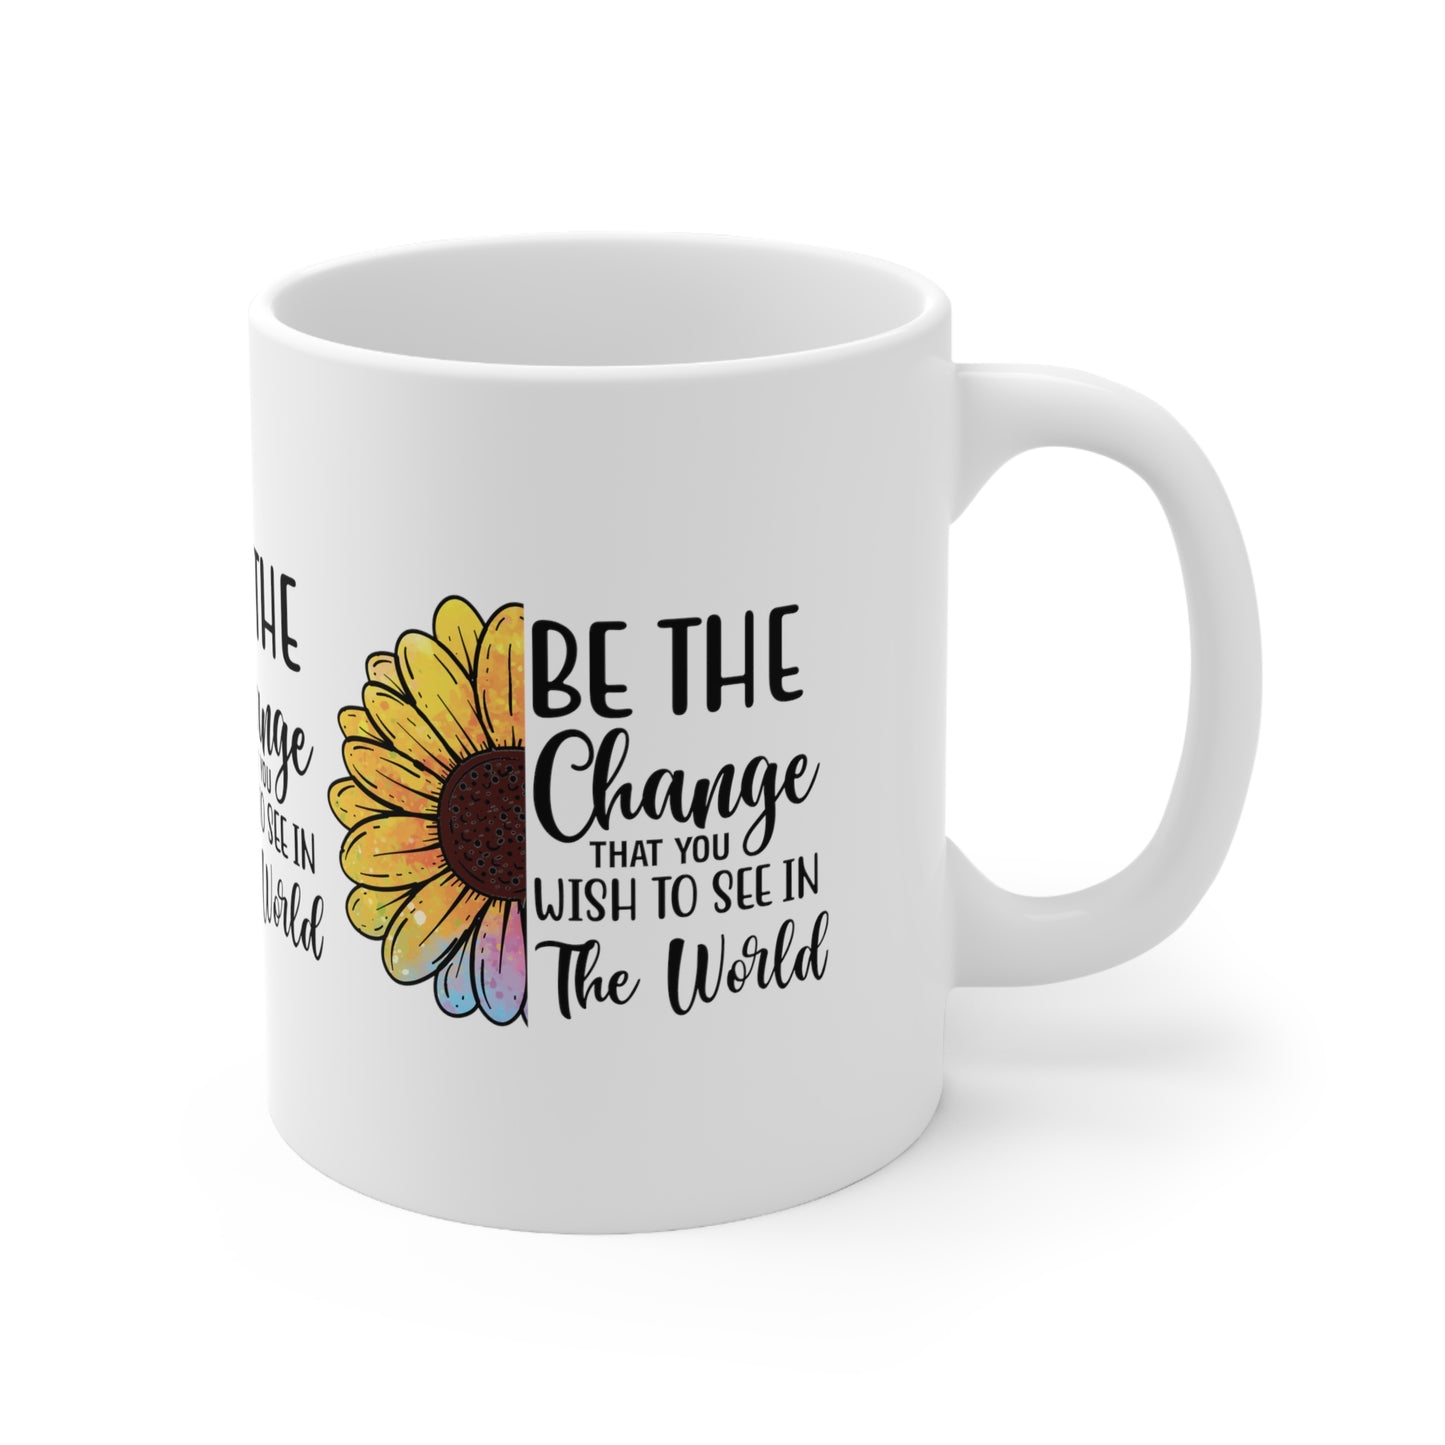 "BE THE CHANGE THAT YOU WISH TO SEE IN THE WORLD" Mug - Mugscity23™️ - Free Shipping